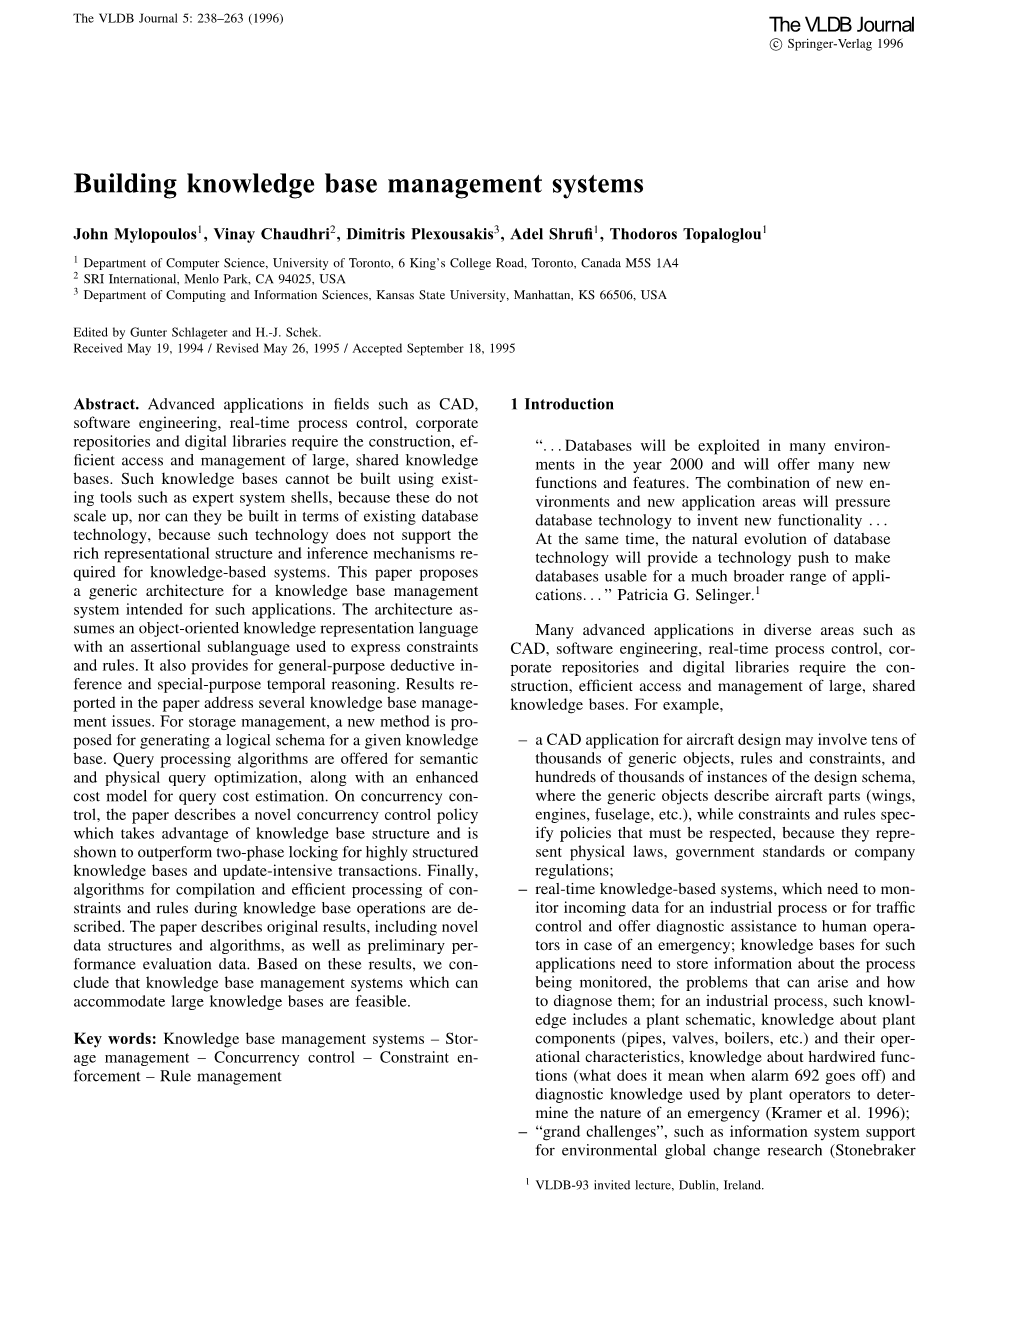 Building Knowledge Base Management Systems